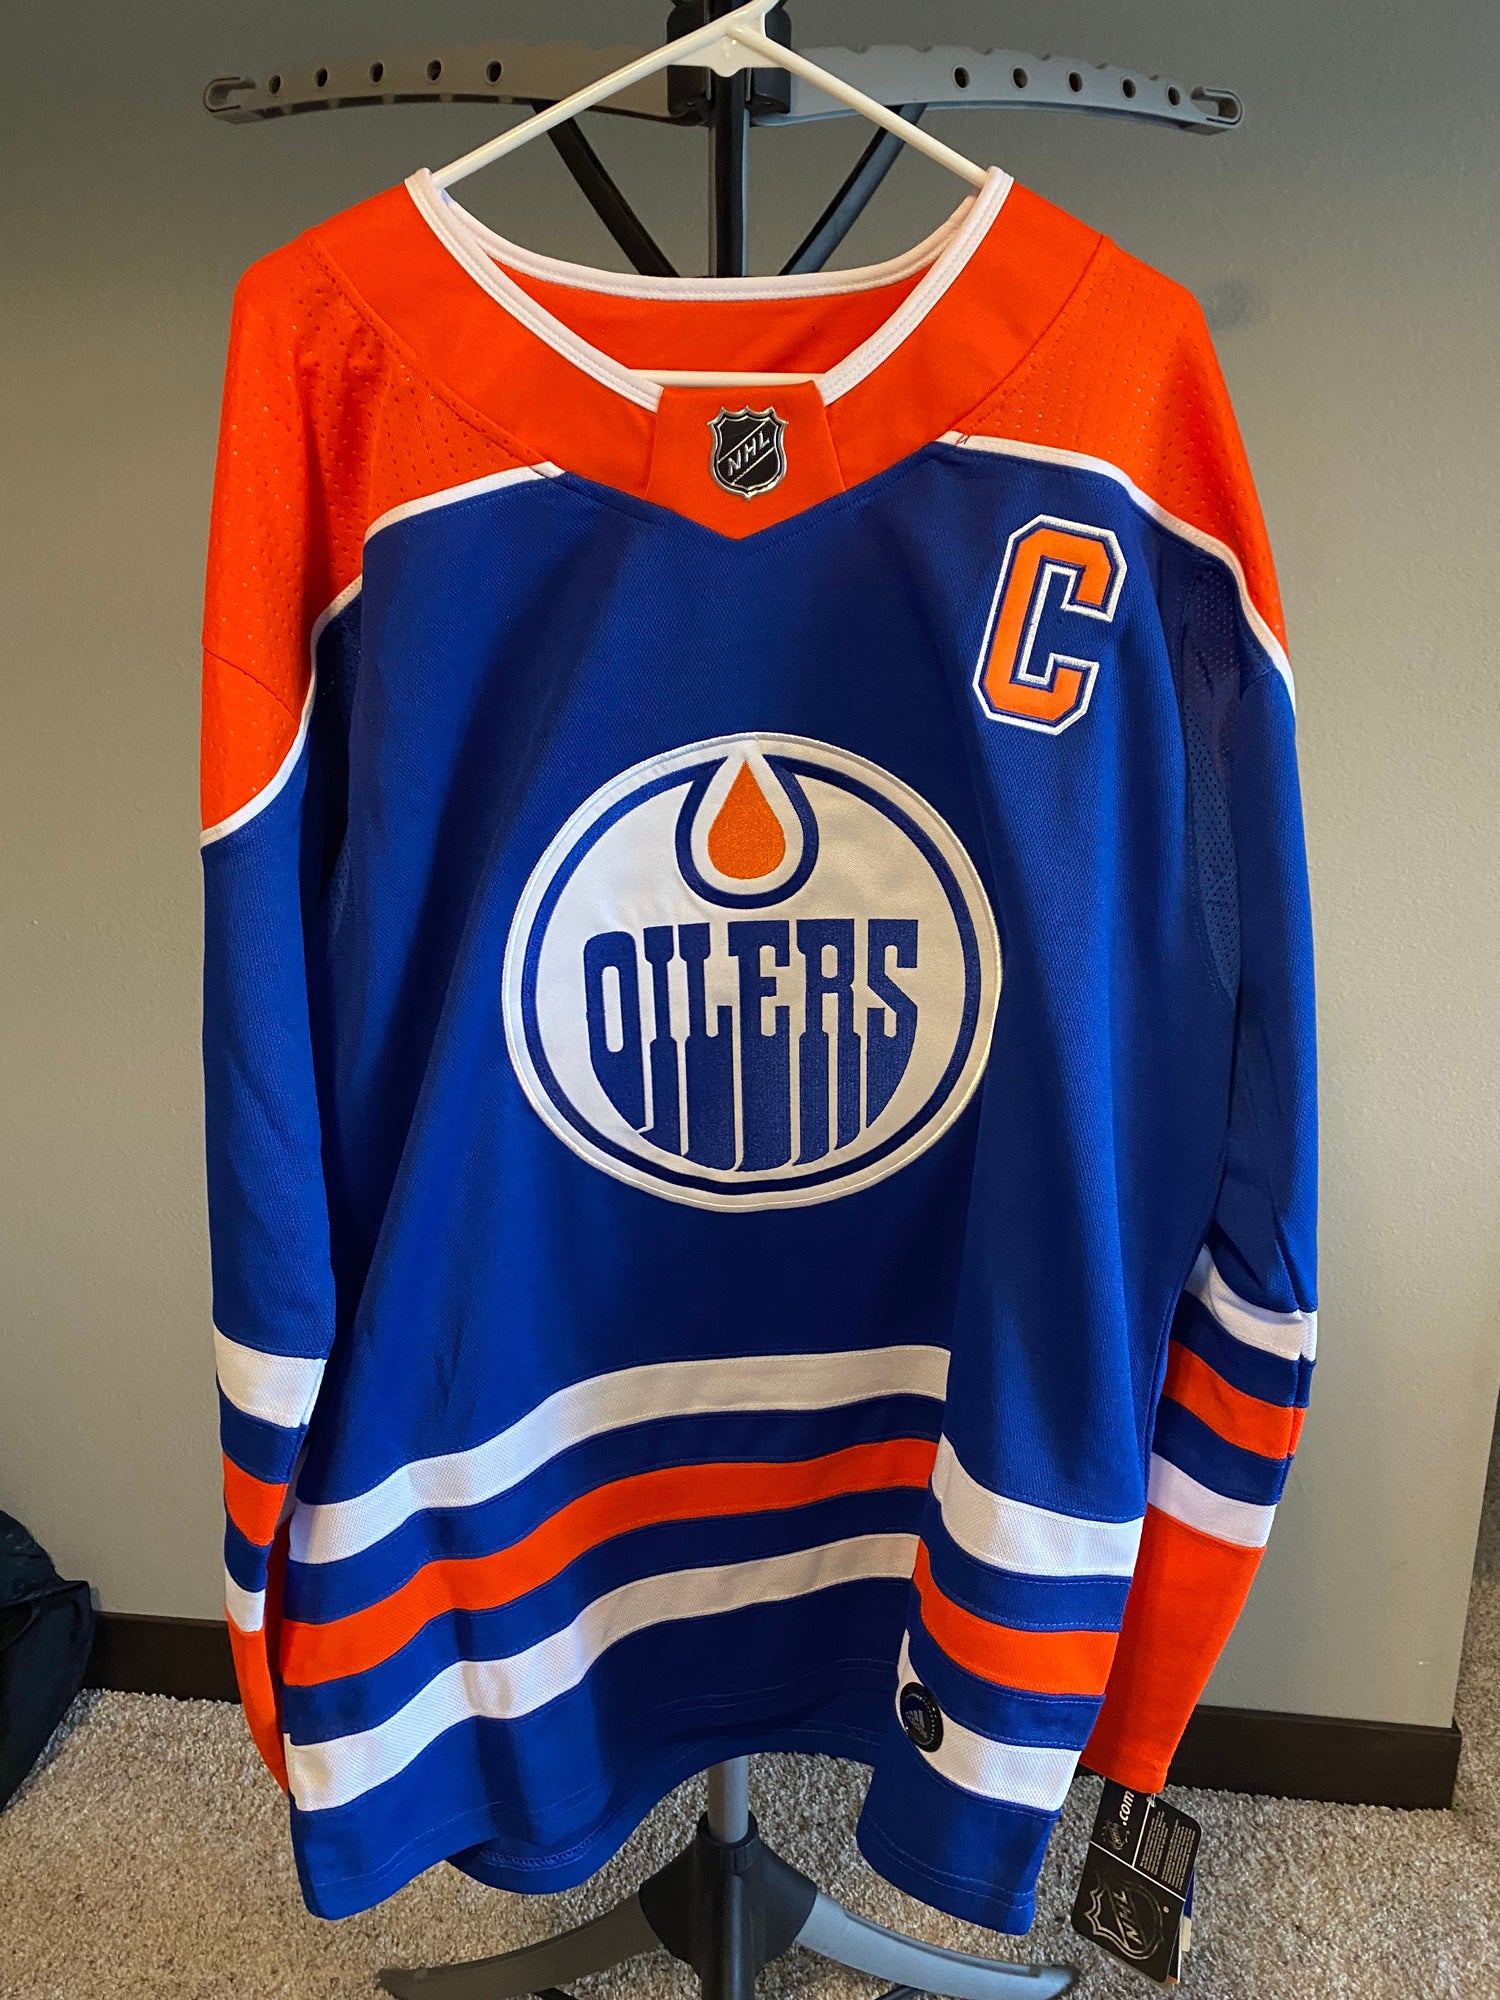 NEW* Connor McDavid Oilers Alternate NHL Jersey Size XL 54